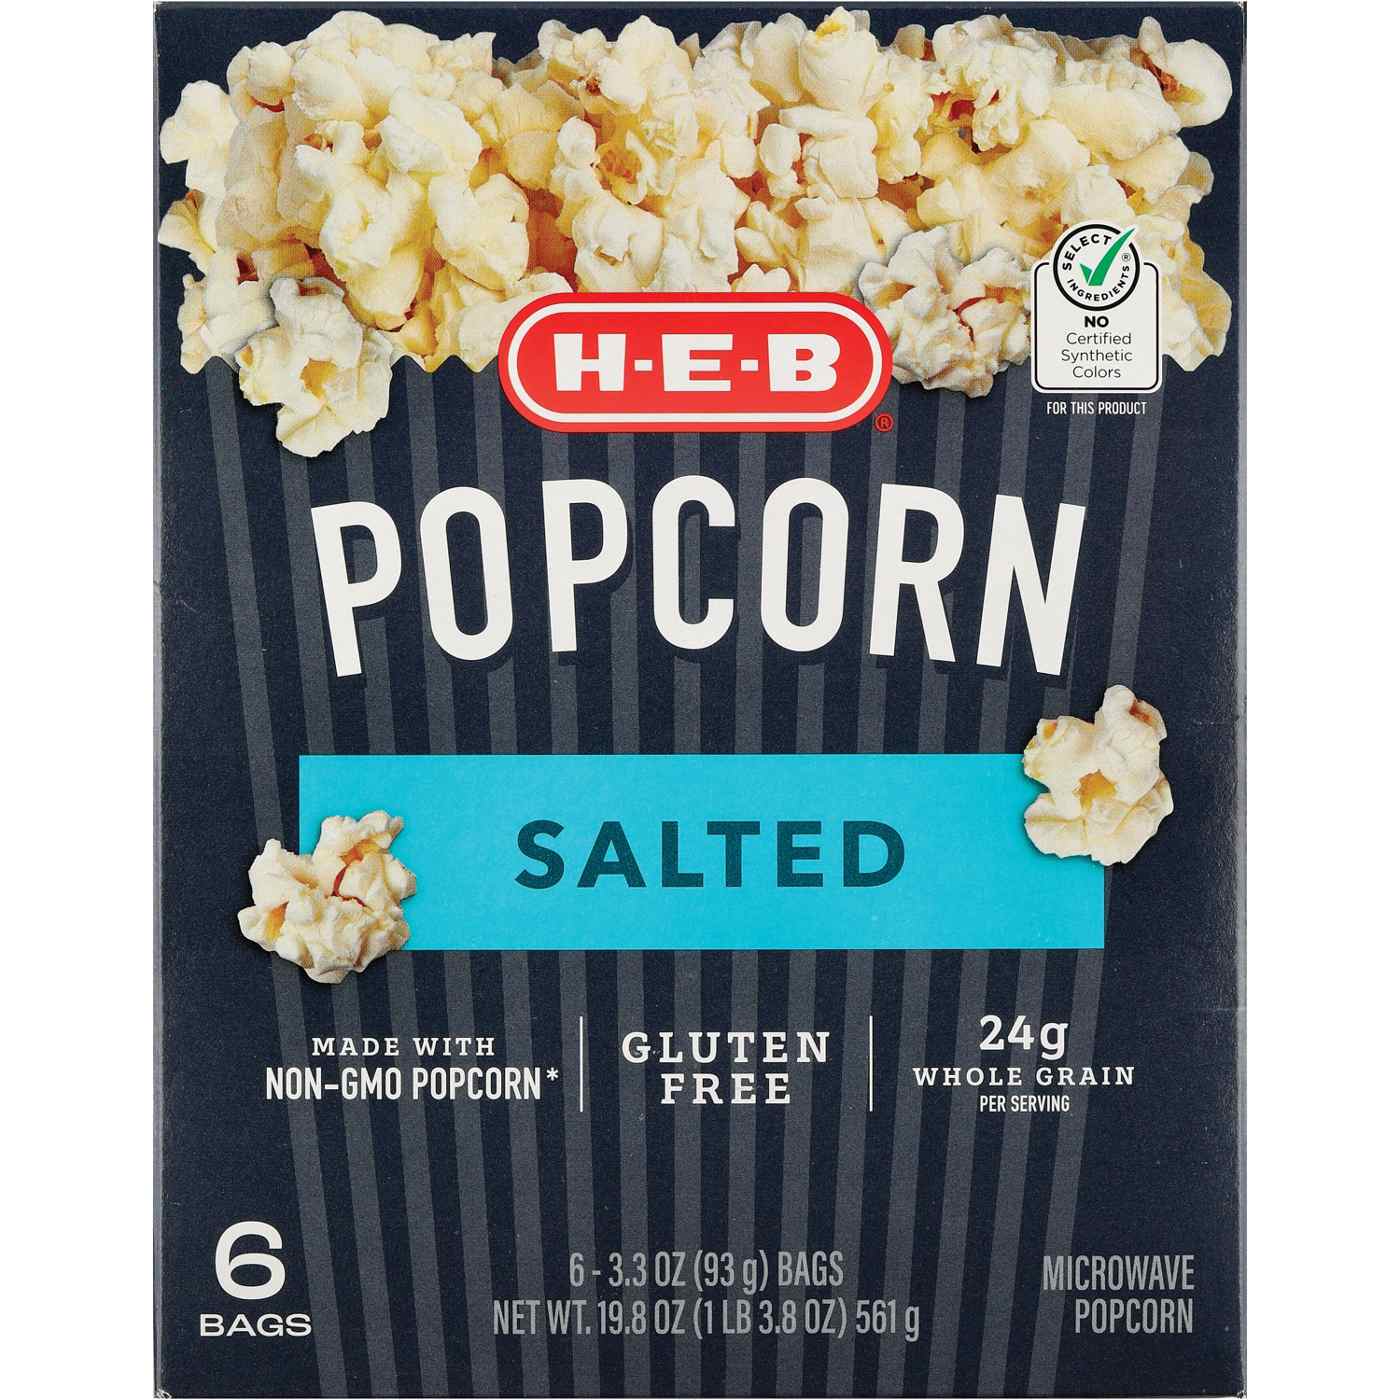 H-E-B Microwave Popcorn - Salted; image 1 of 2